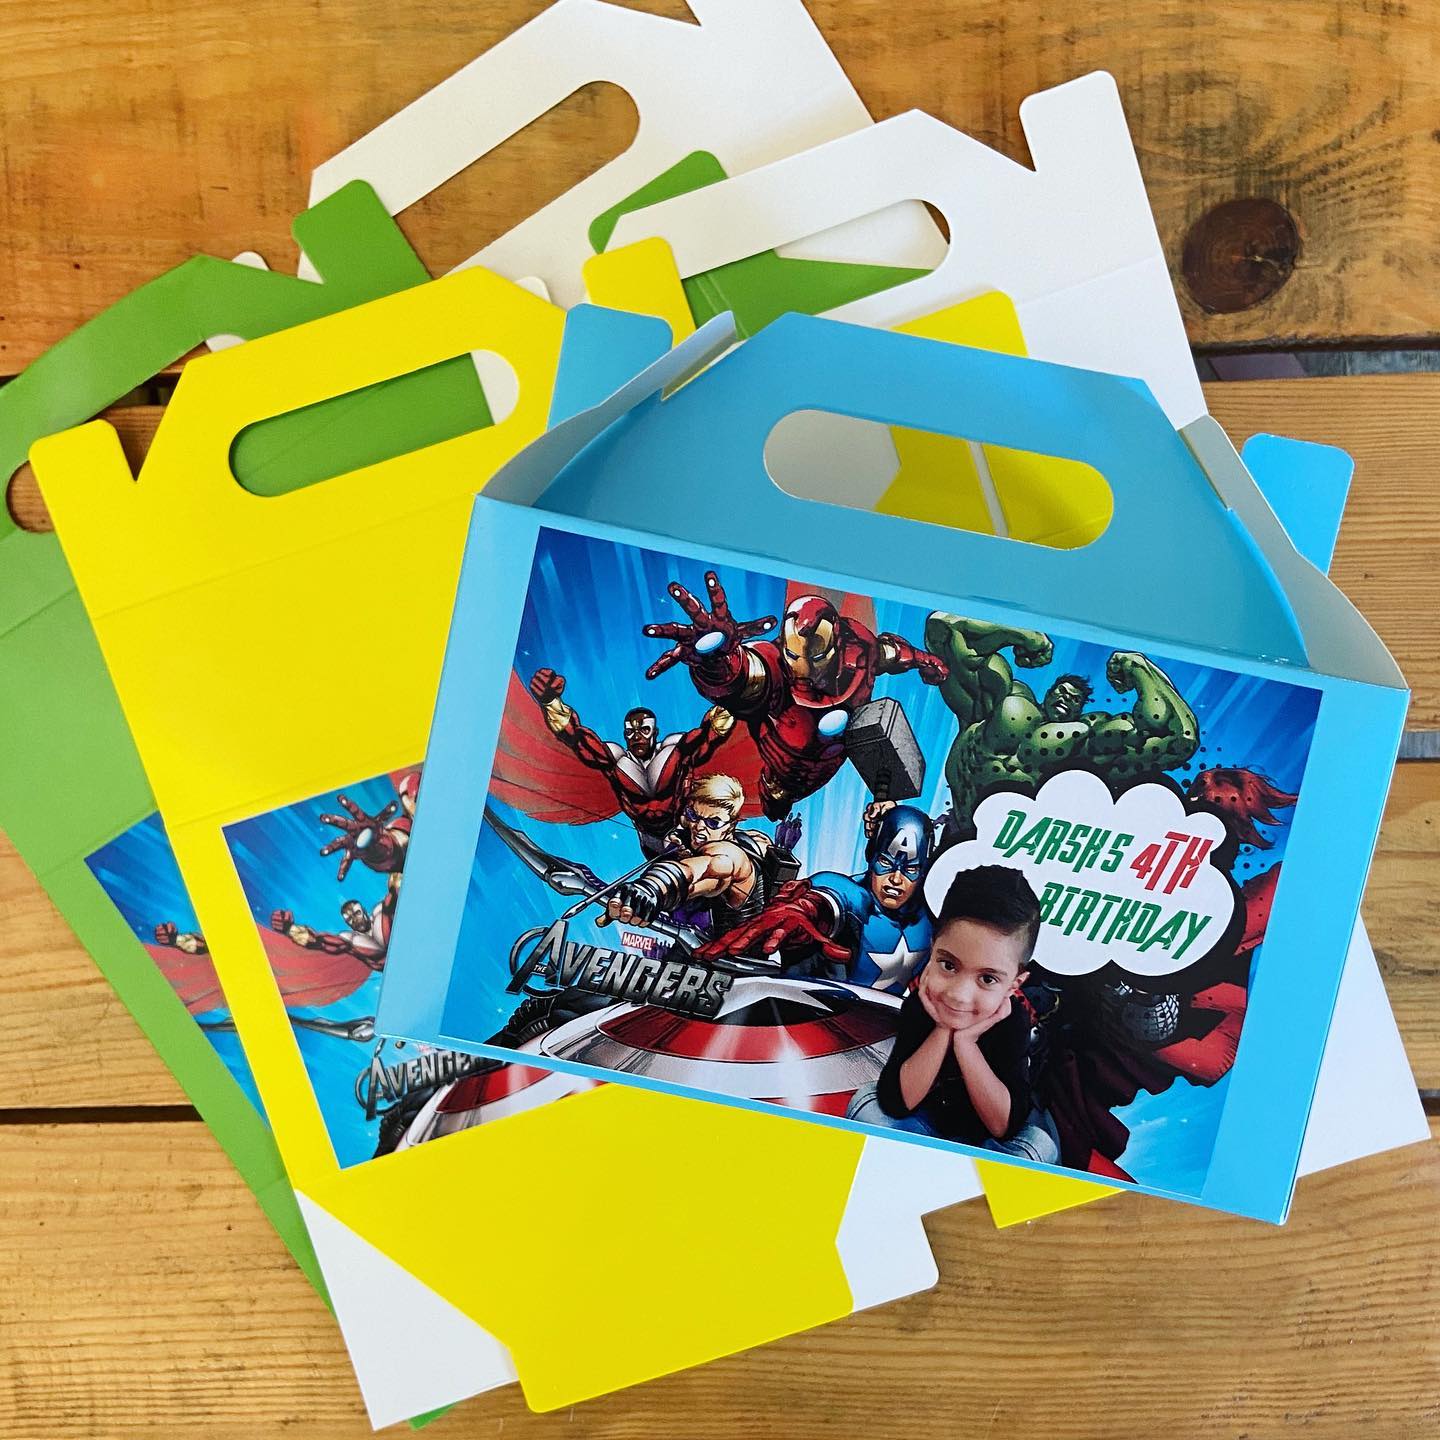 Kids Party Pack - Any theme